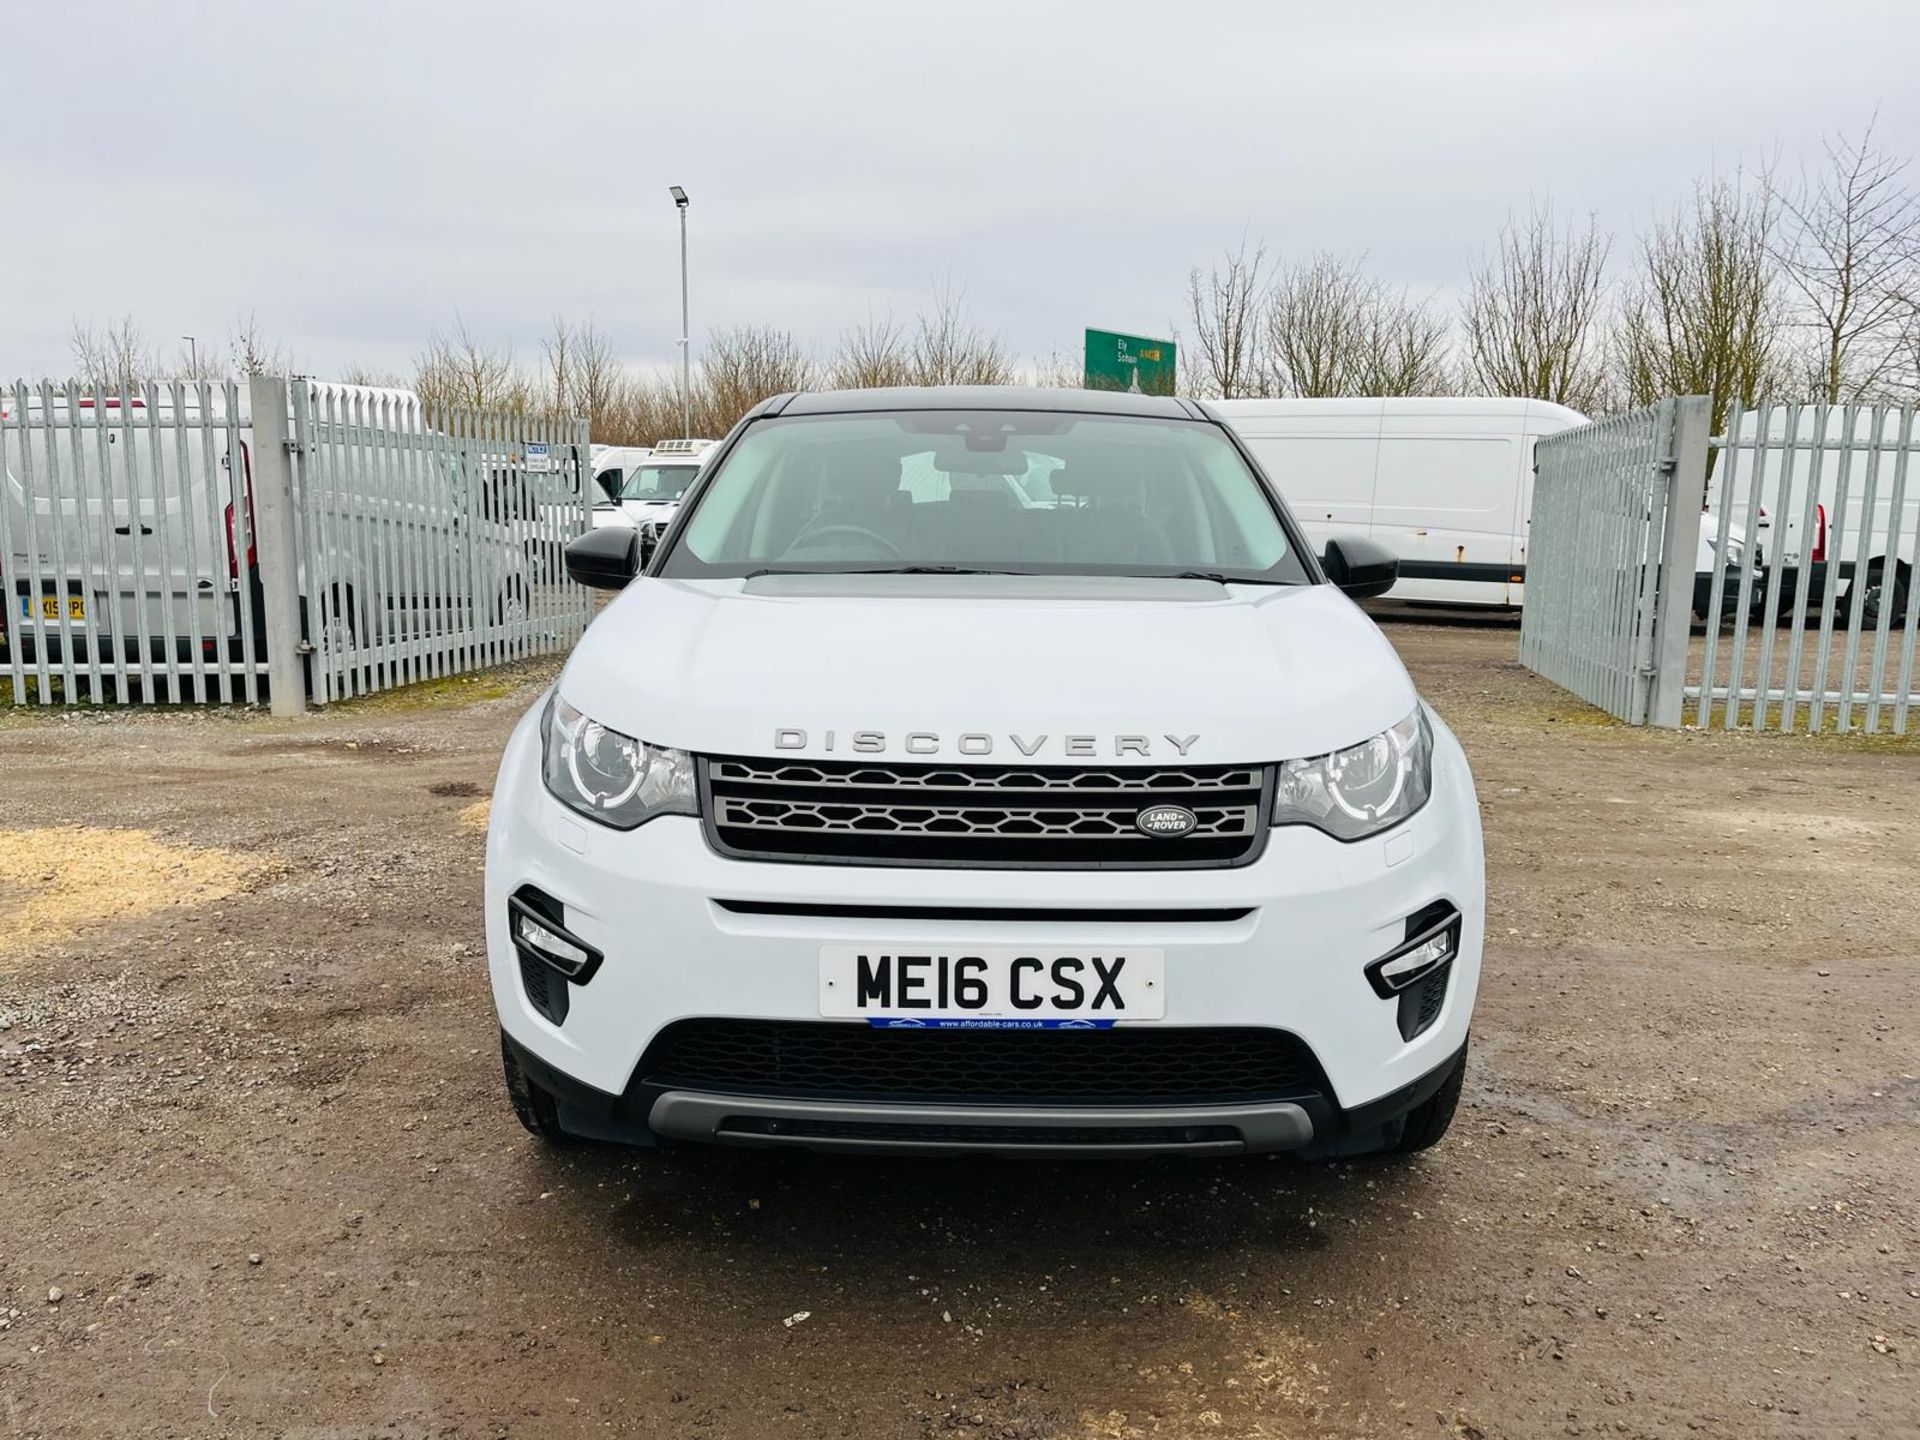 ** ON SALE ** Land Rover Discovery Sport 2.0 SE TD4 180 Automatic -2016'16 Reg' -ULEZ Compliant - Image 2 of 35